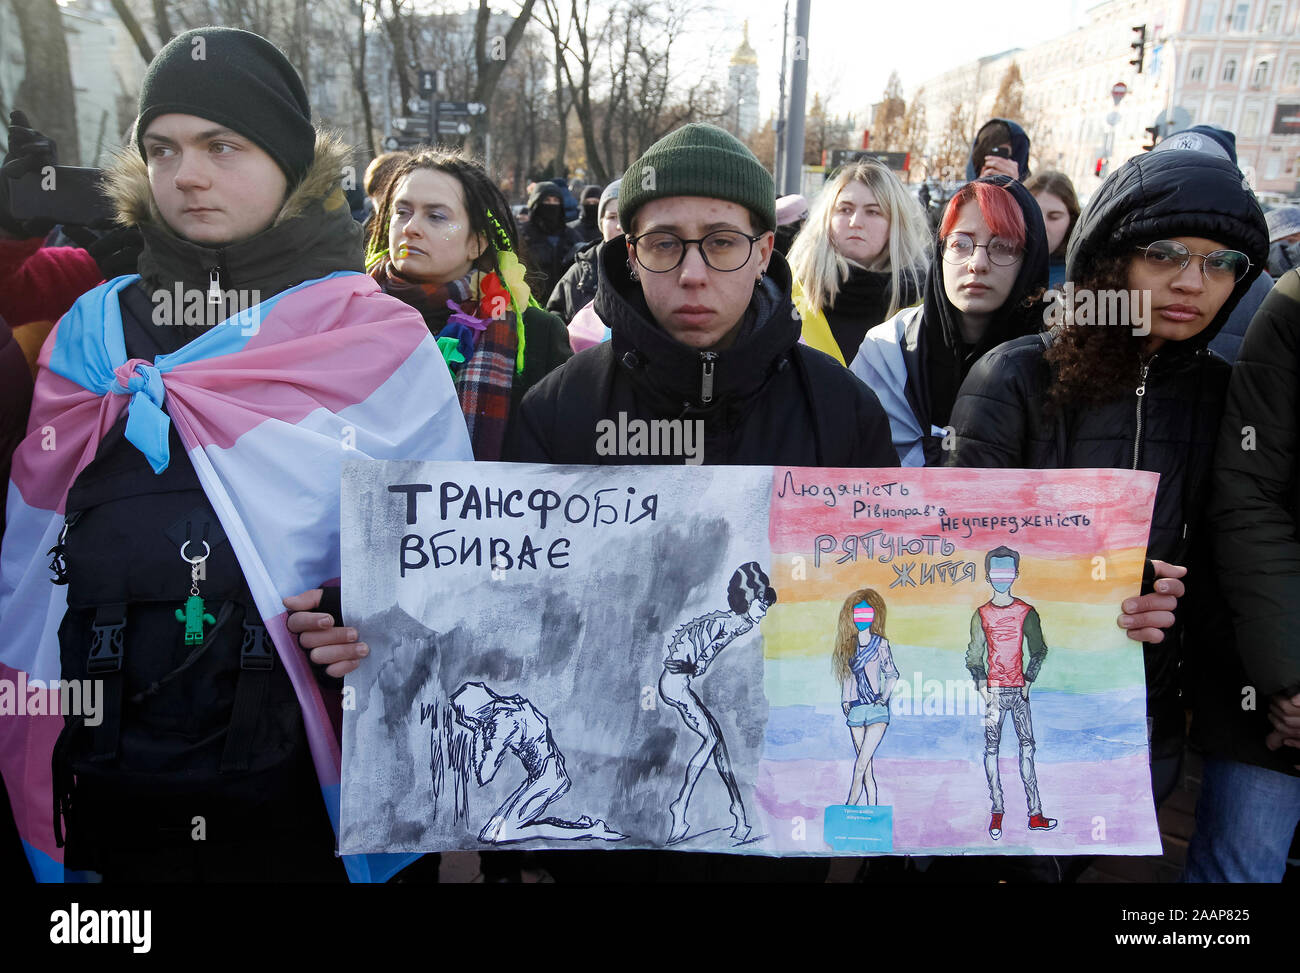 A participant holds a placard saying 'Transphobia kills' during the protest.Transgender rights activists in Ukraine’s capital Kyiv held a march to mark Transgender Day of Remembrance. In 2018, the police failed to protect those participating in a similar march from attacks by violent groups advocating hatred and discrimination. This year, there is a serious risk of new attacks and the police must ensure people can safely exercise their rights to freedom of peaceful assembly and expression without discrimination. Stock Photo